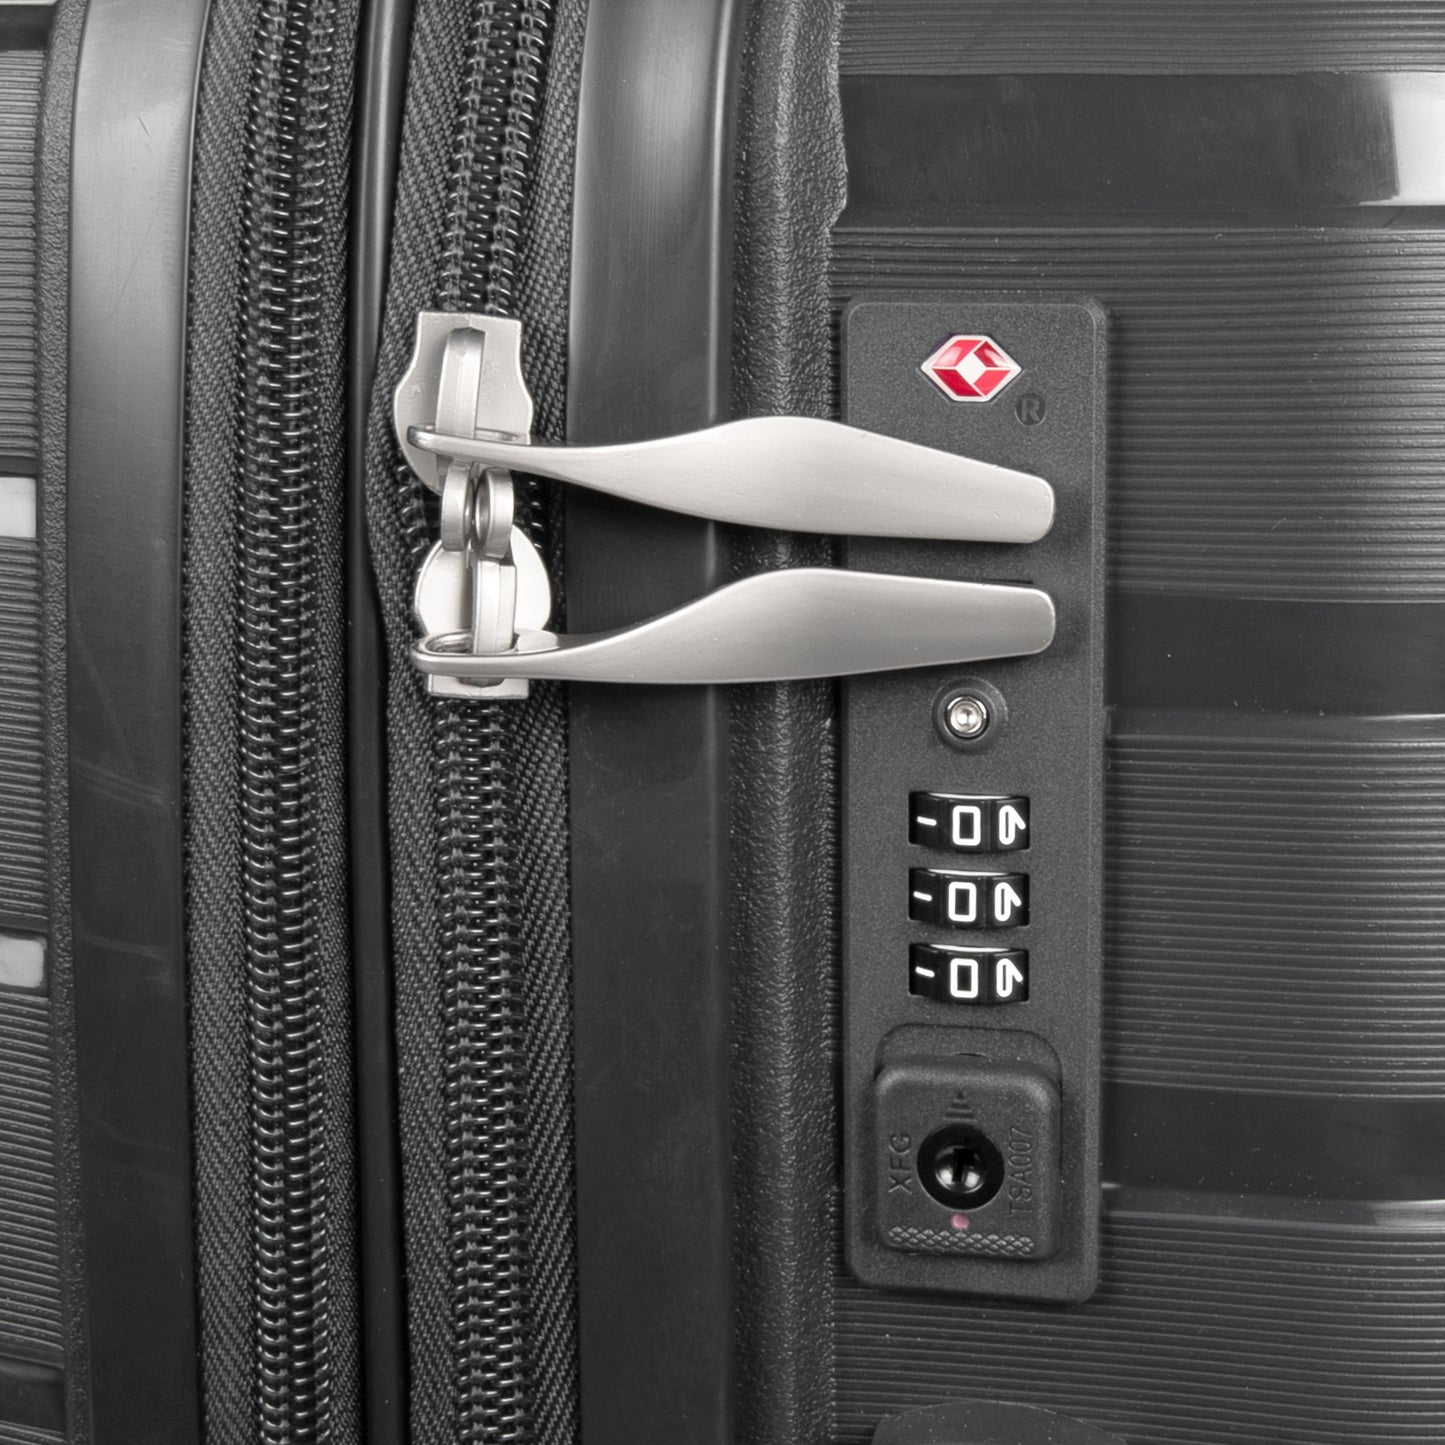 PPS27 24" Dark Grey Expandable Medium Check-in Suitcase